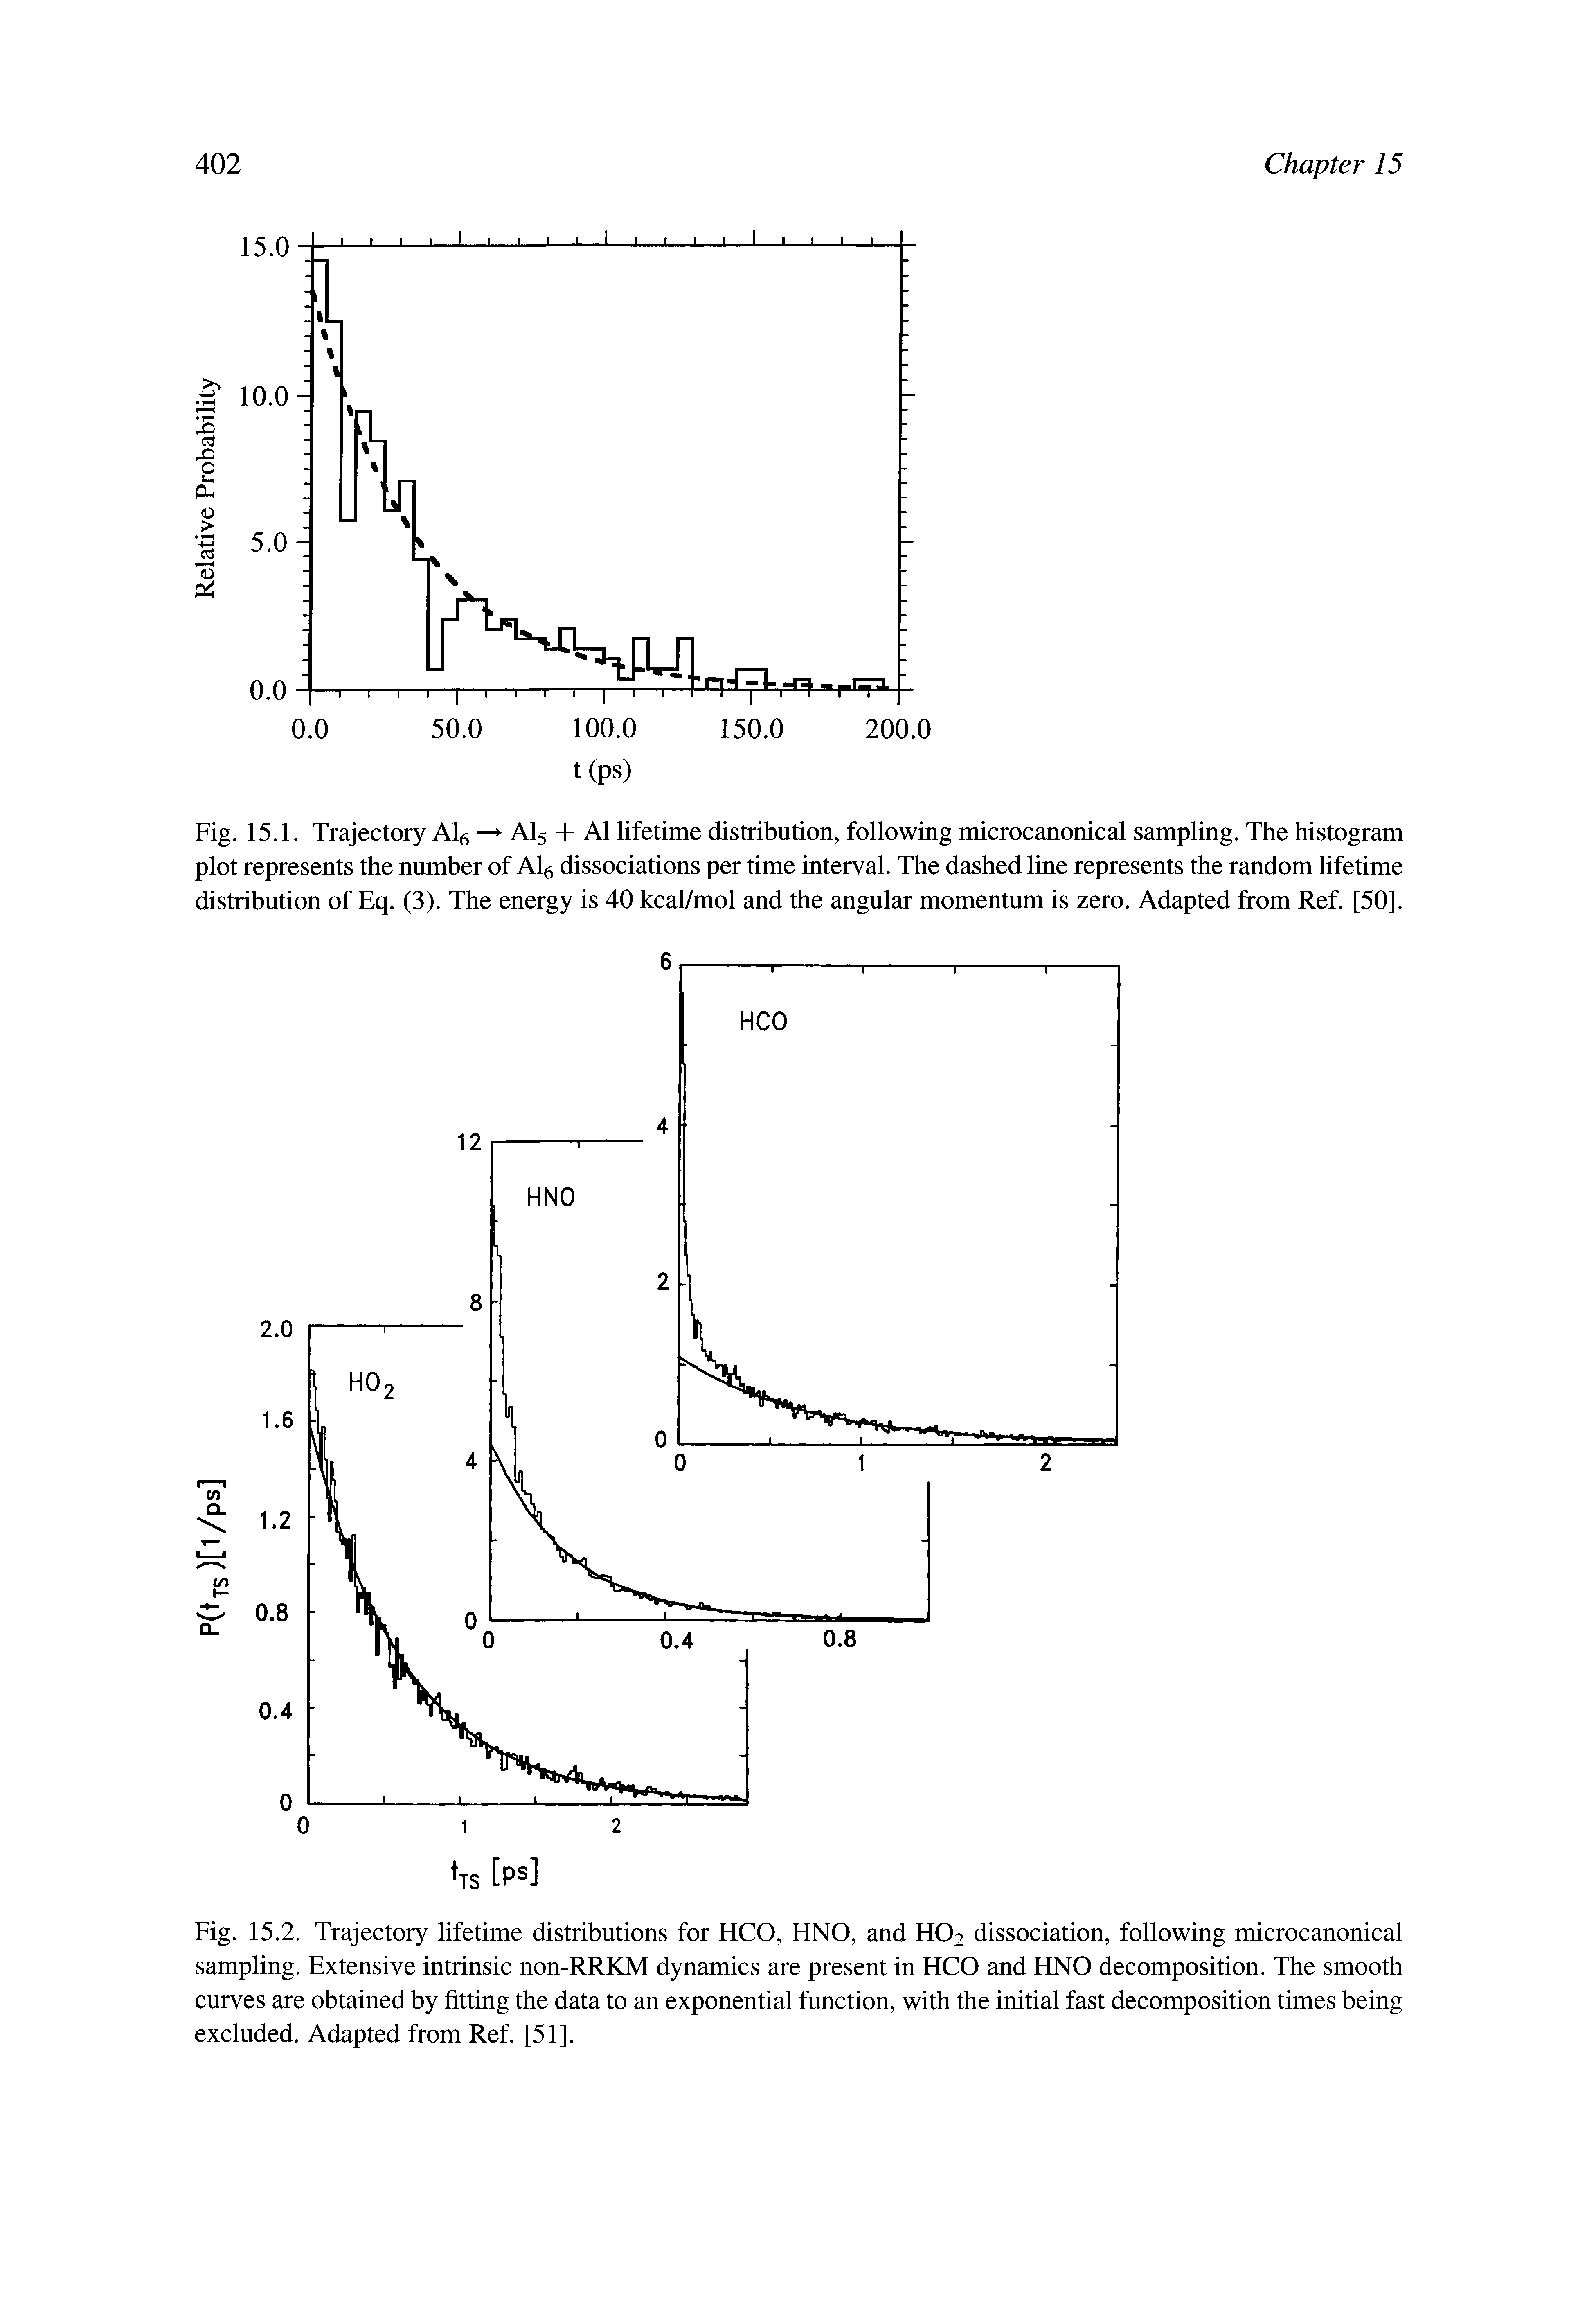 Fig. 15.2. Trajectory lifetime distributions for HCO, HNO, and HO2 dissociation, following microcanonical sampling. Extensive intrinsic non-RRKM dynamics are present in HCO and HNO decomposition. The smooth curves are obtained by fitting the data to an exponential function, with the initial fast decomposition times being excluded. Adapted from Ref. [51].